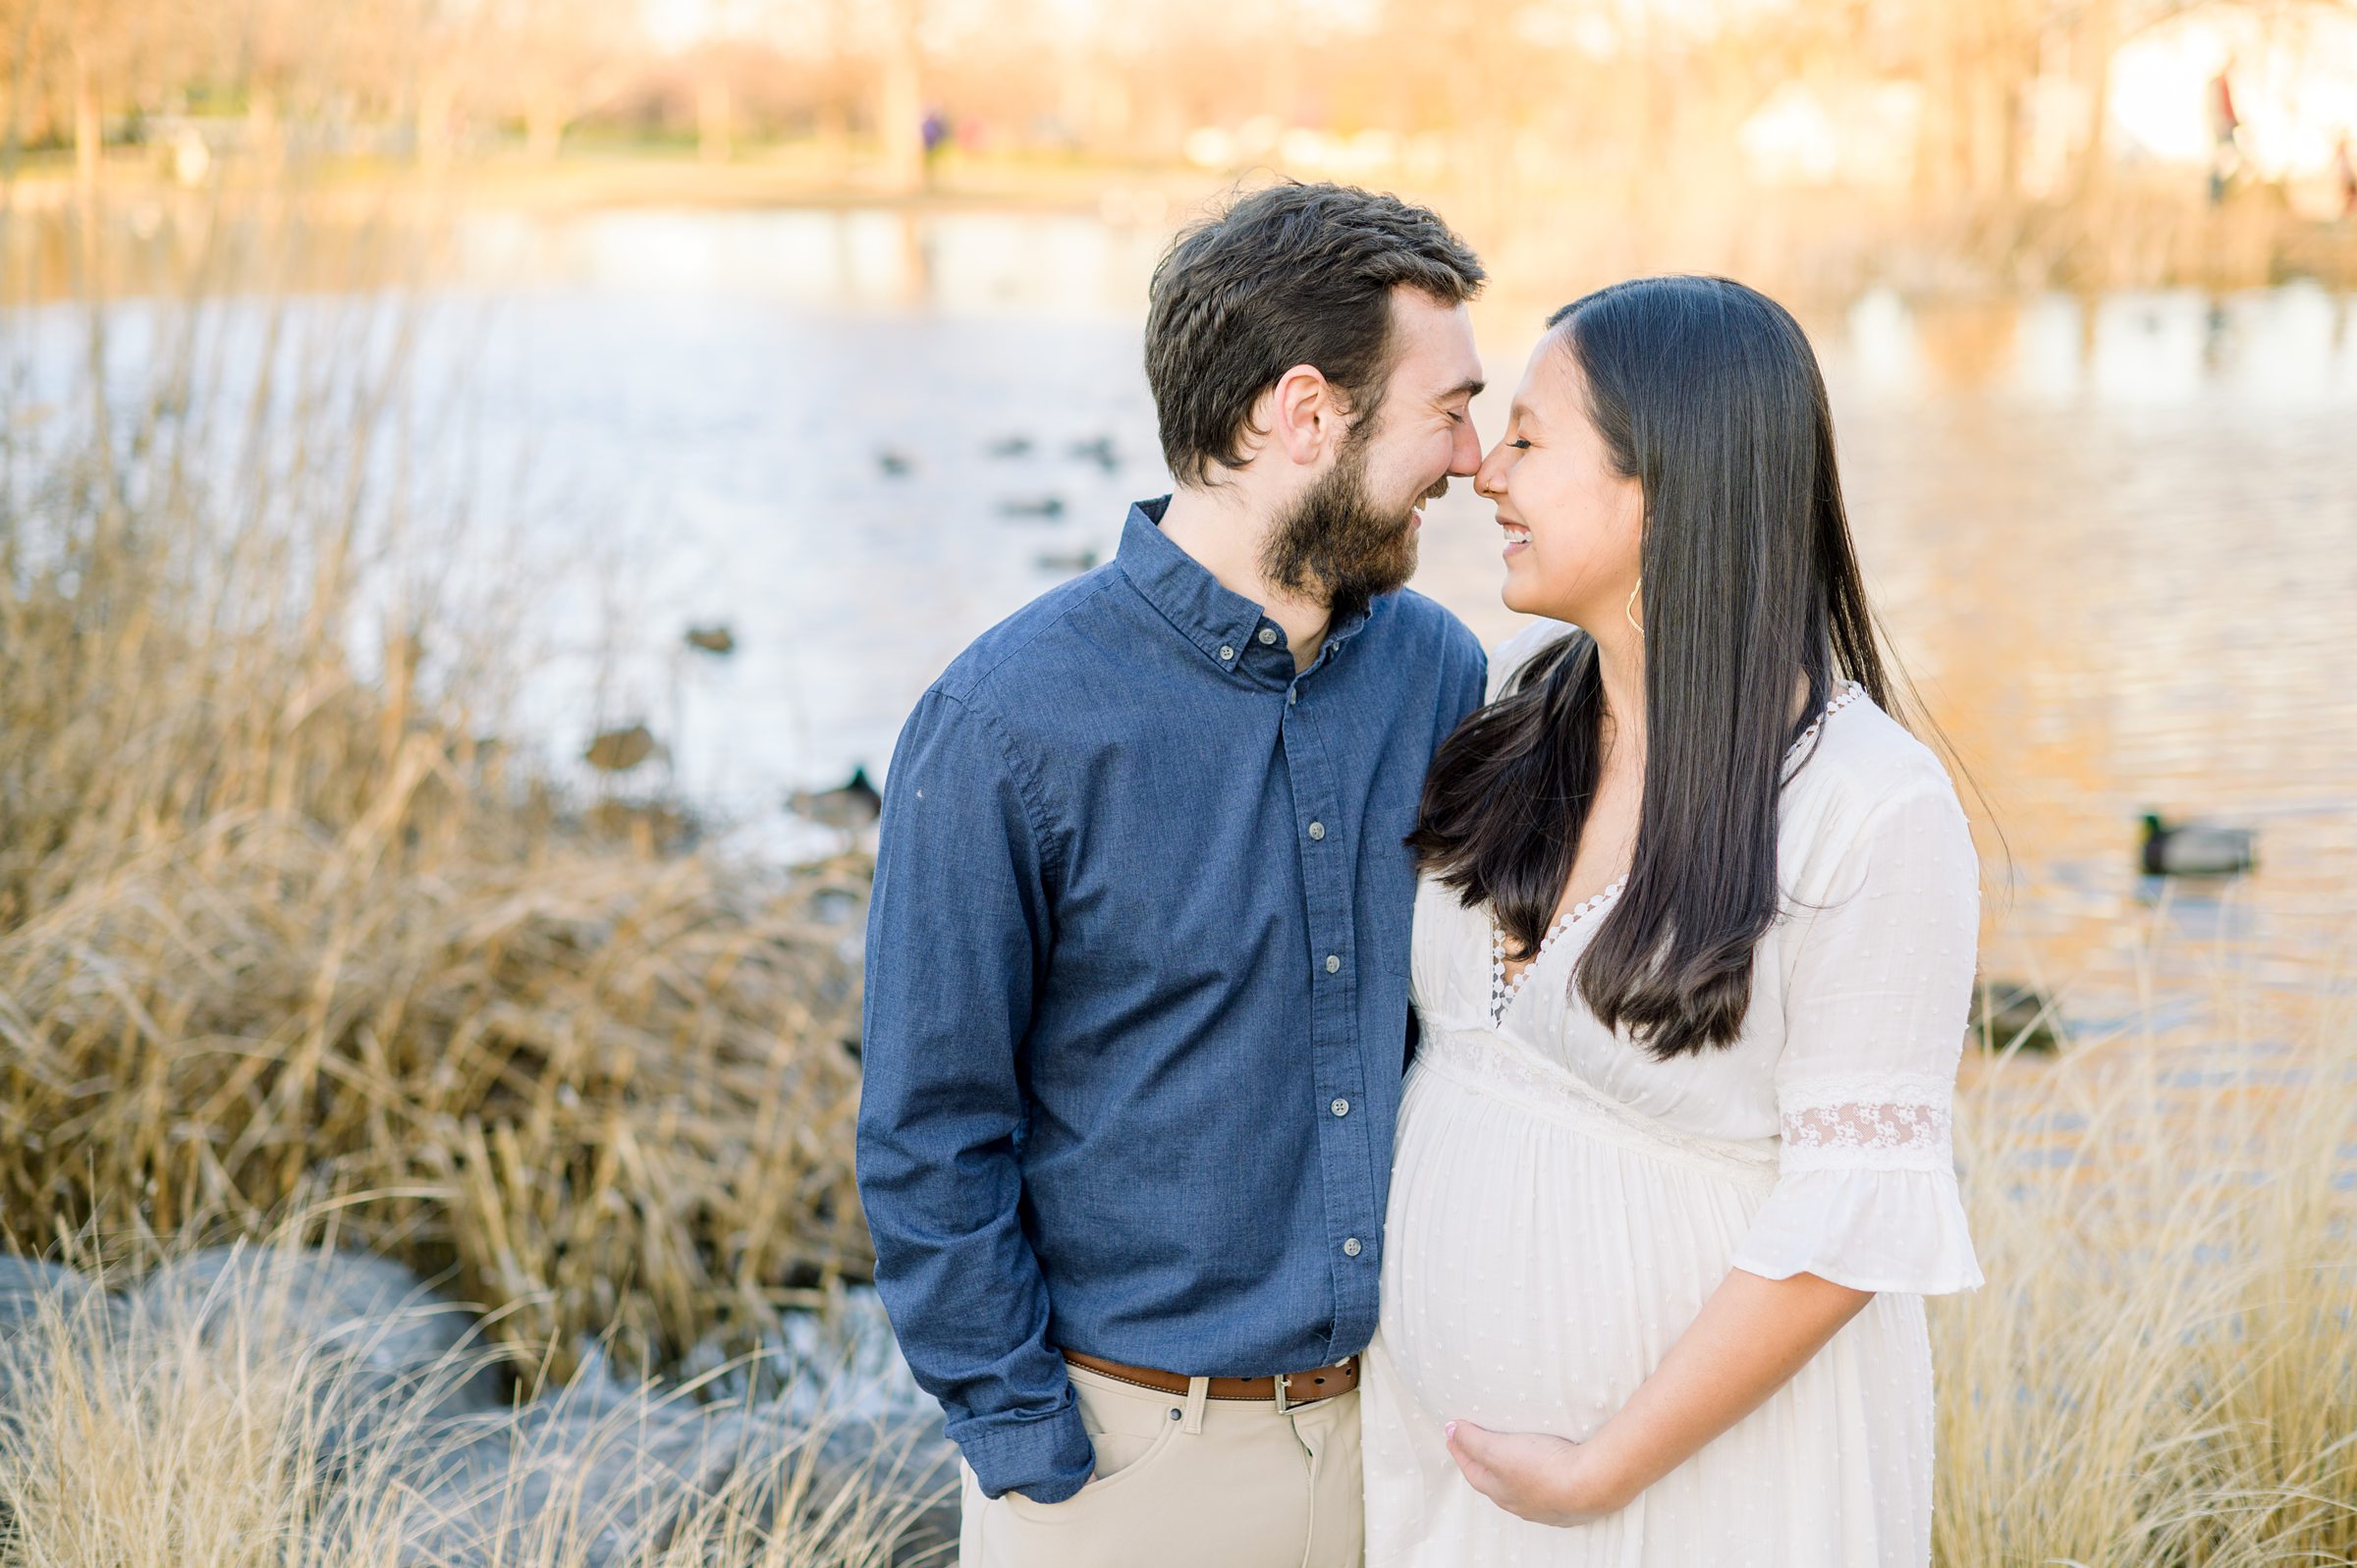 Abby and Nick's maternity session in Patterson Park in Baltimore County featuring a stunning golden hour and beautiful pink trees.